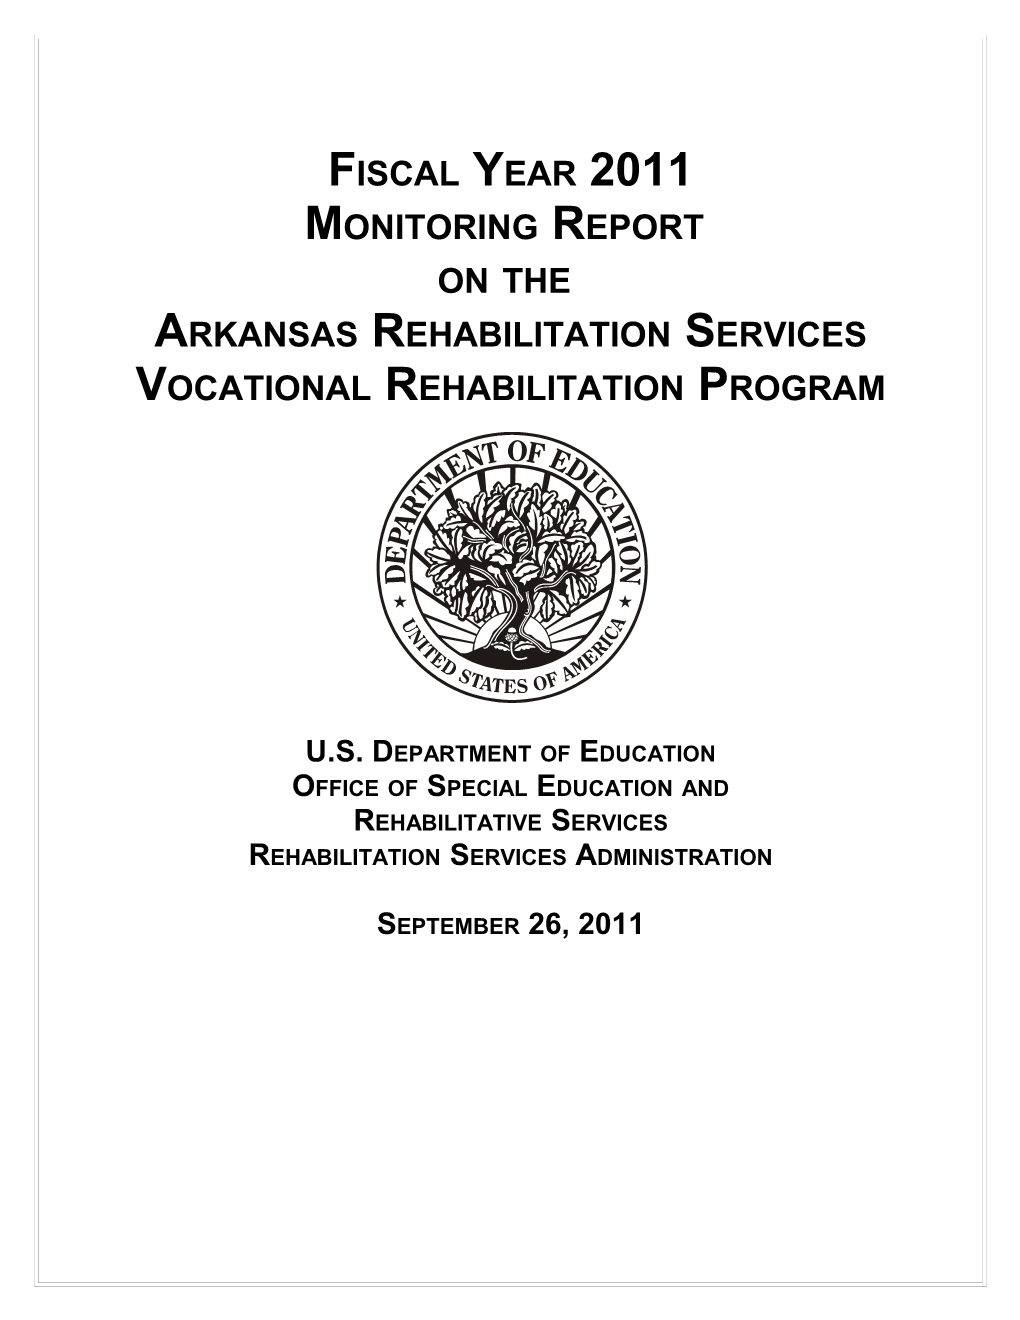 Fiscal Year 2011 Monitoring Report on the Arkansas Vocational Rehabilitation Program (MS Word)